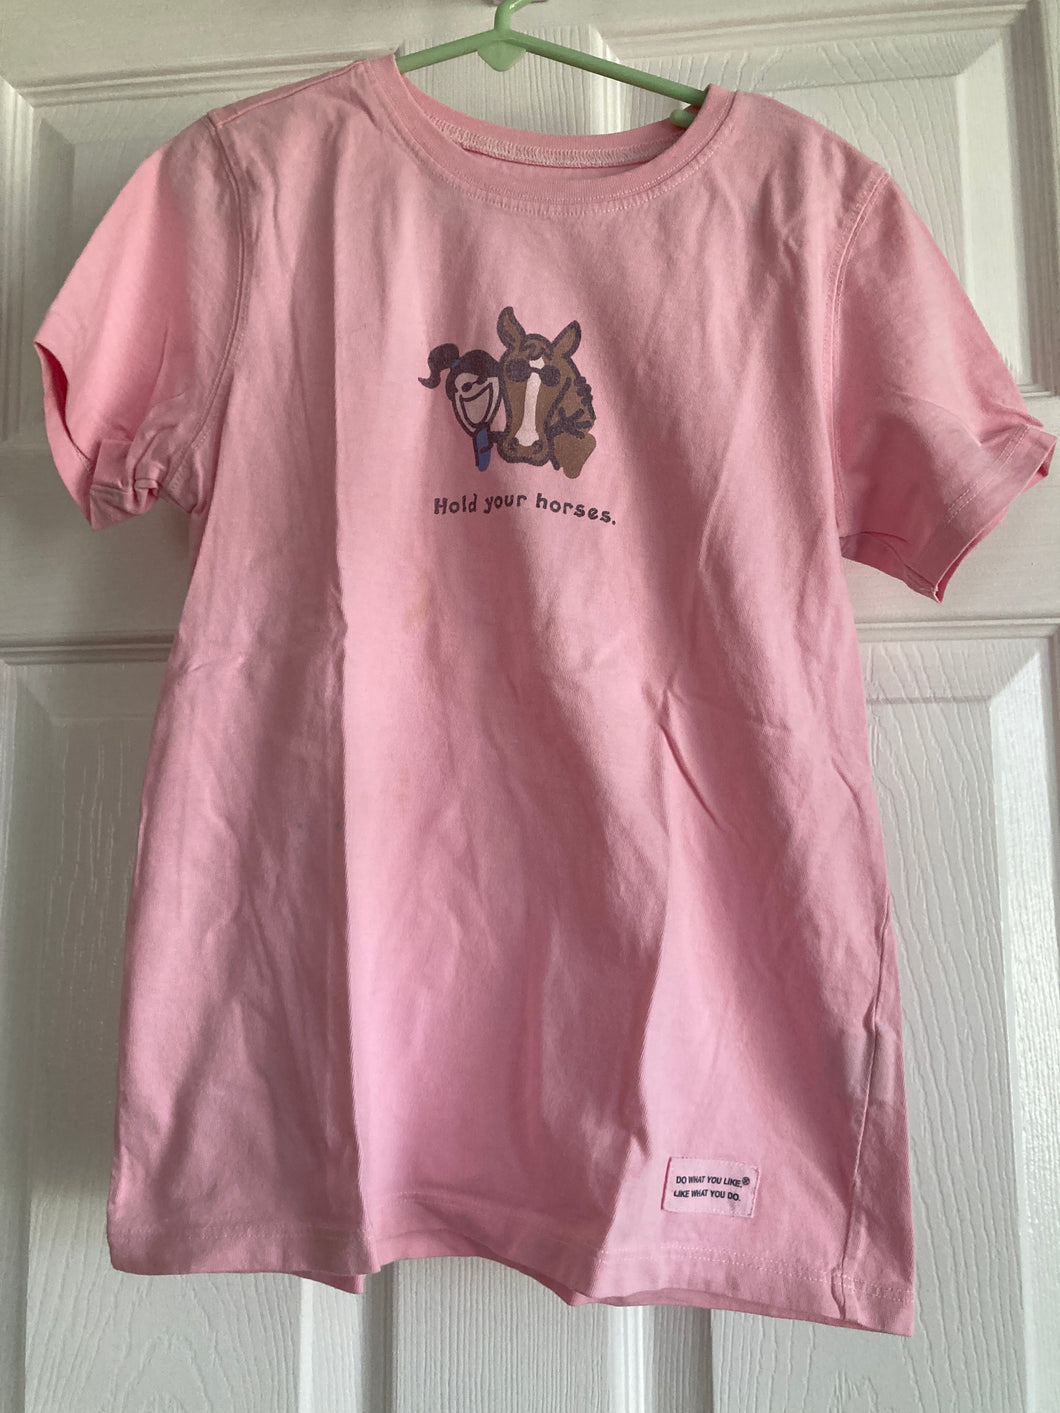 Life is Good TShirt, pink with “hold your horses” on front 7